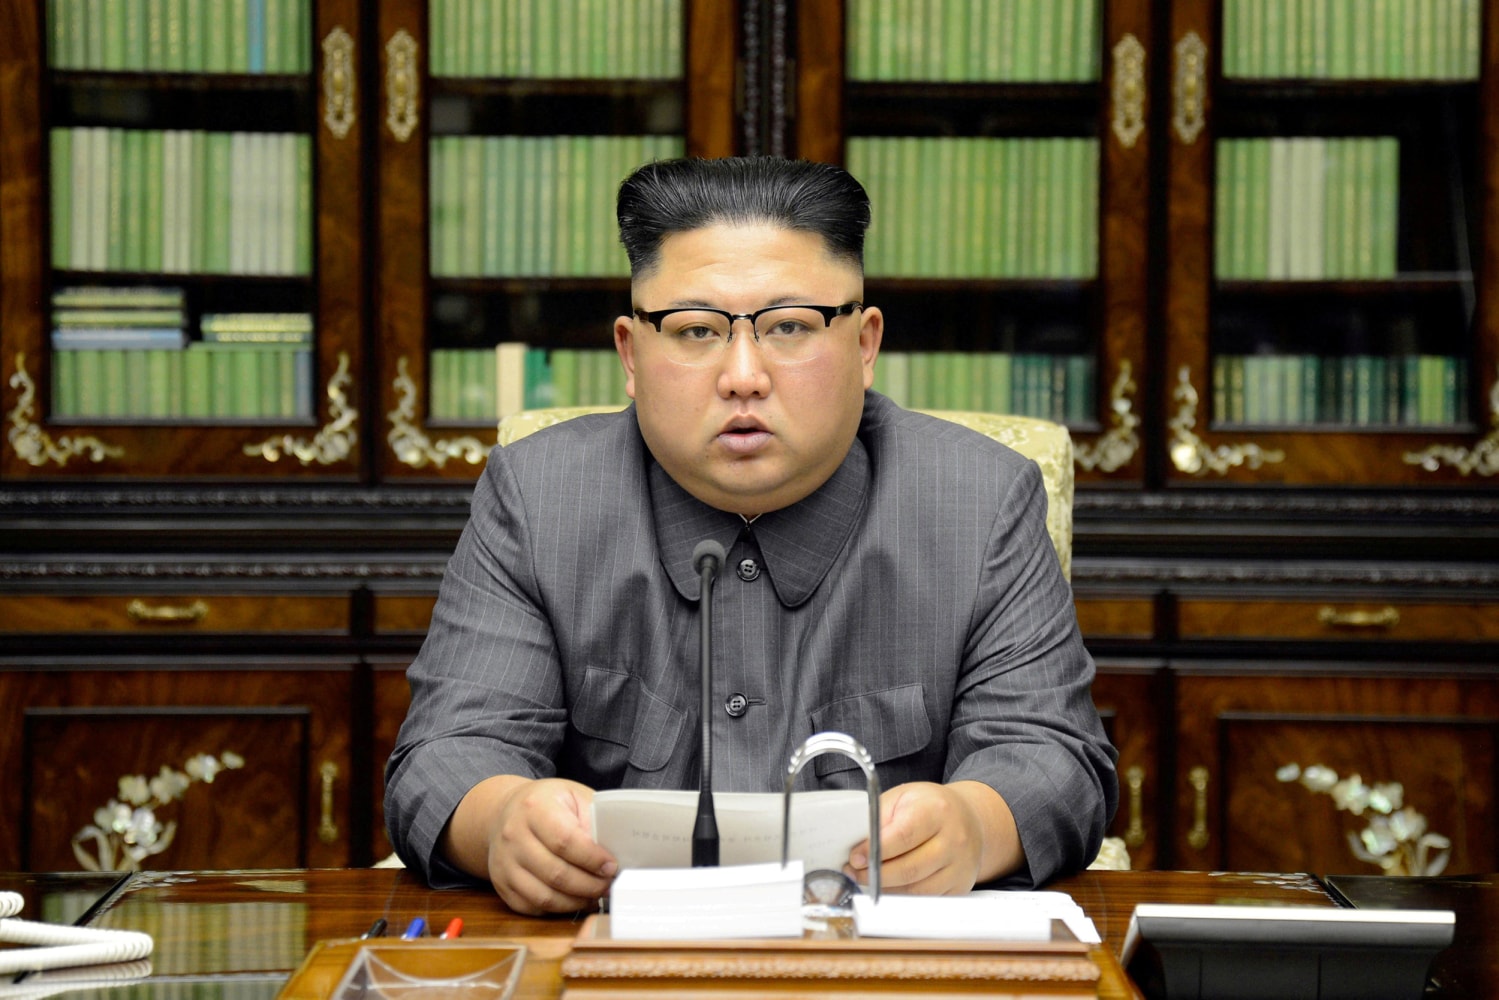 North Korea: Take 'Literally' Our Threat to Test Hydrogen Bomb Above Ground